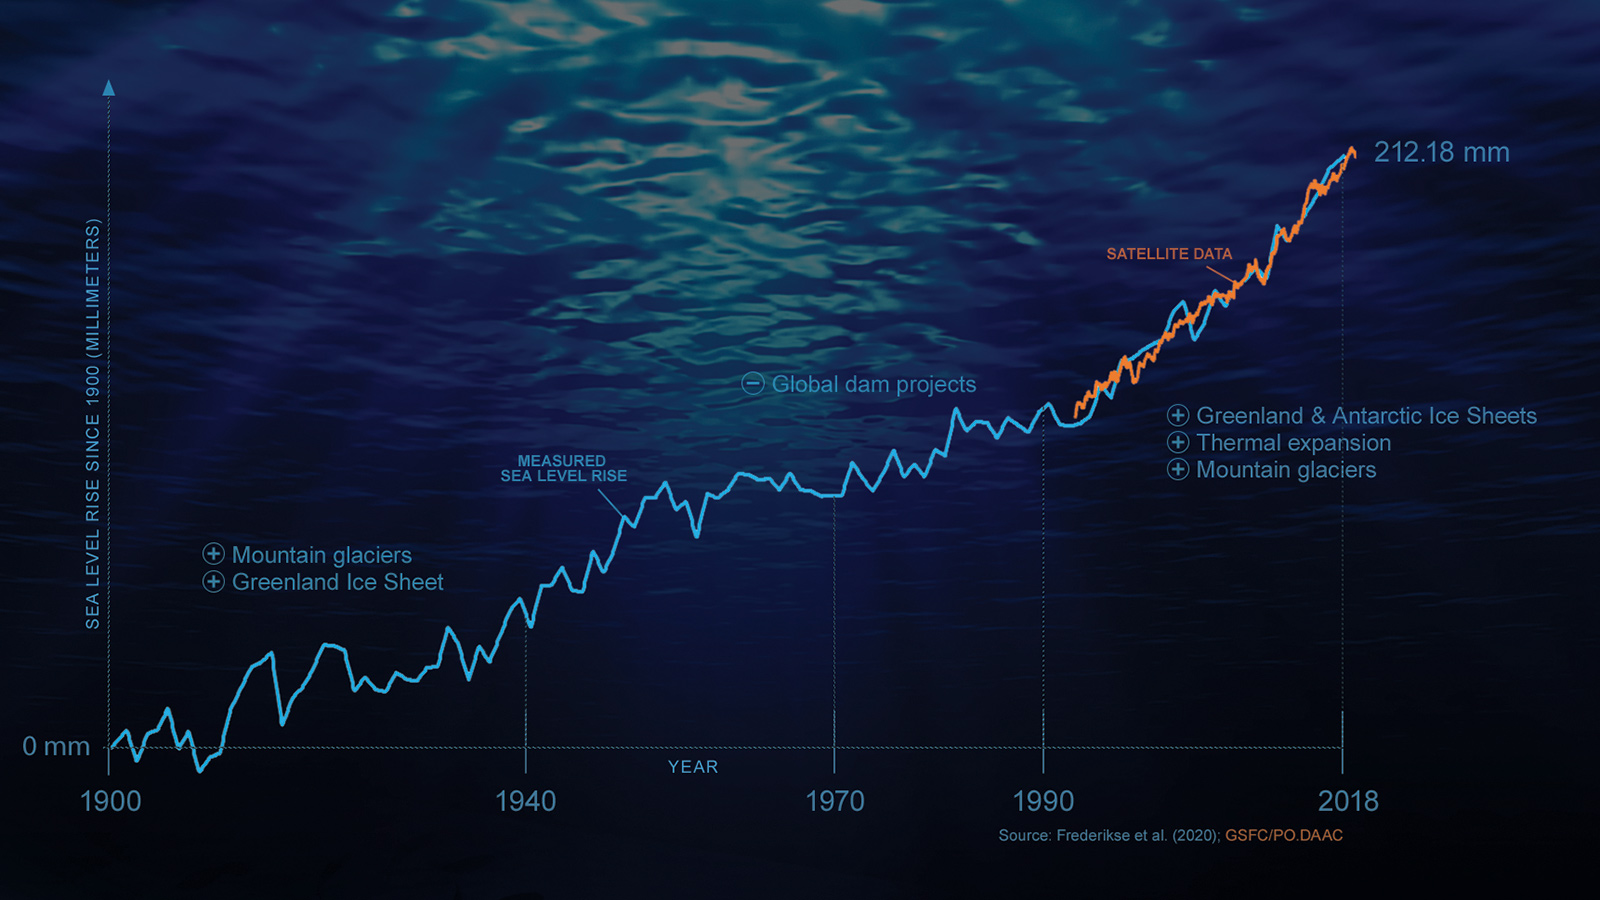 This infographic shows the rise in sea levels since 1900